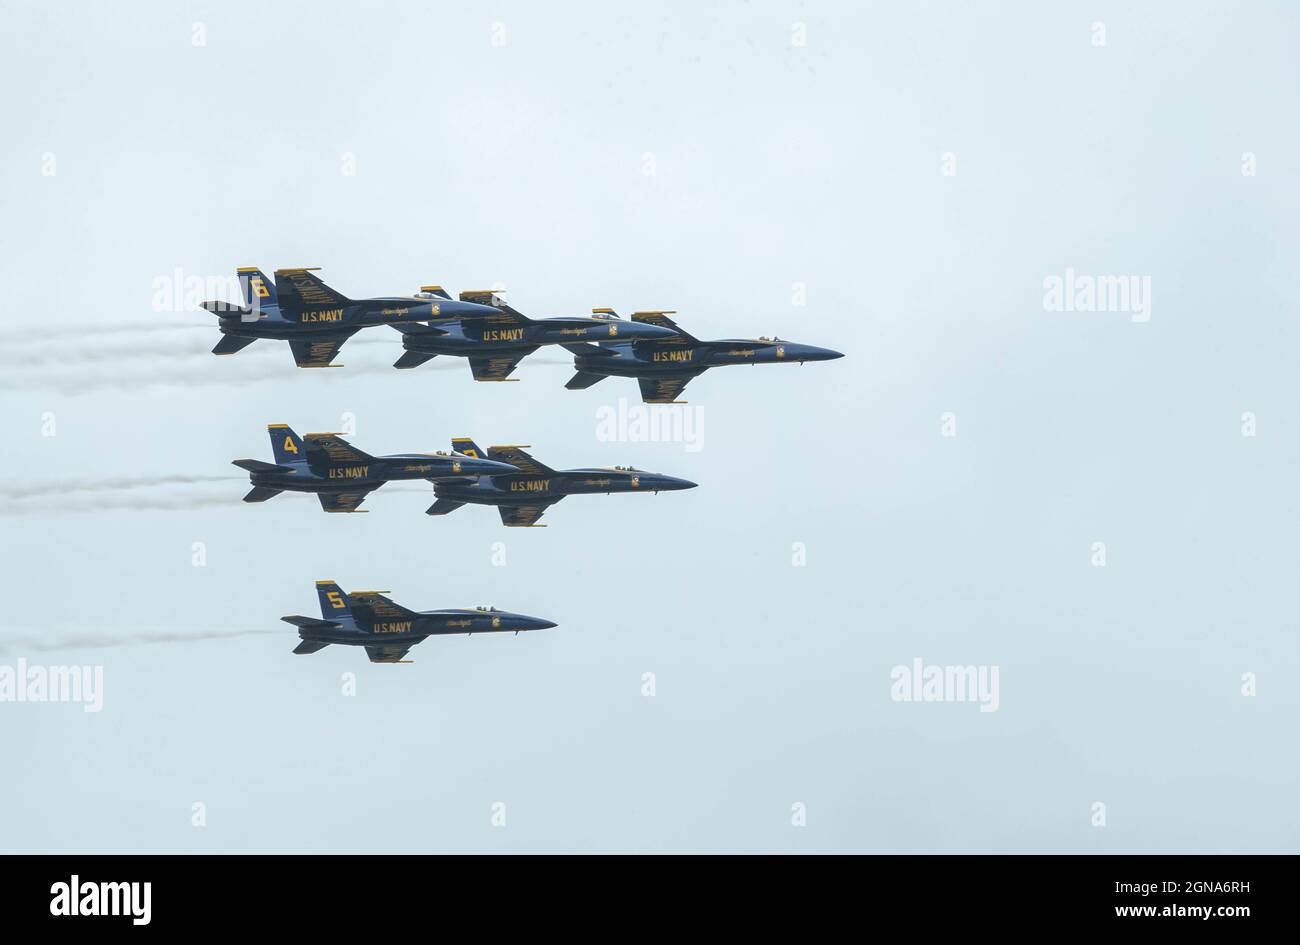 U.S. Navy Blue Angels 1-6 make their final approach above Marine Corps Air Station (MCAS) Cherry Point, North Carolina, Sept. 23, 2021. The Blue Angels are the headliners for the MCAS Cherry Point 80th anniversary air show, Sept. 25-26, 2021. (U.S. Marine Corps photo by Pfc. Lauralle Walker.) Stock Photo